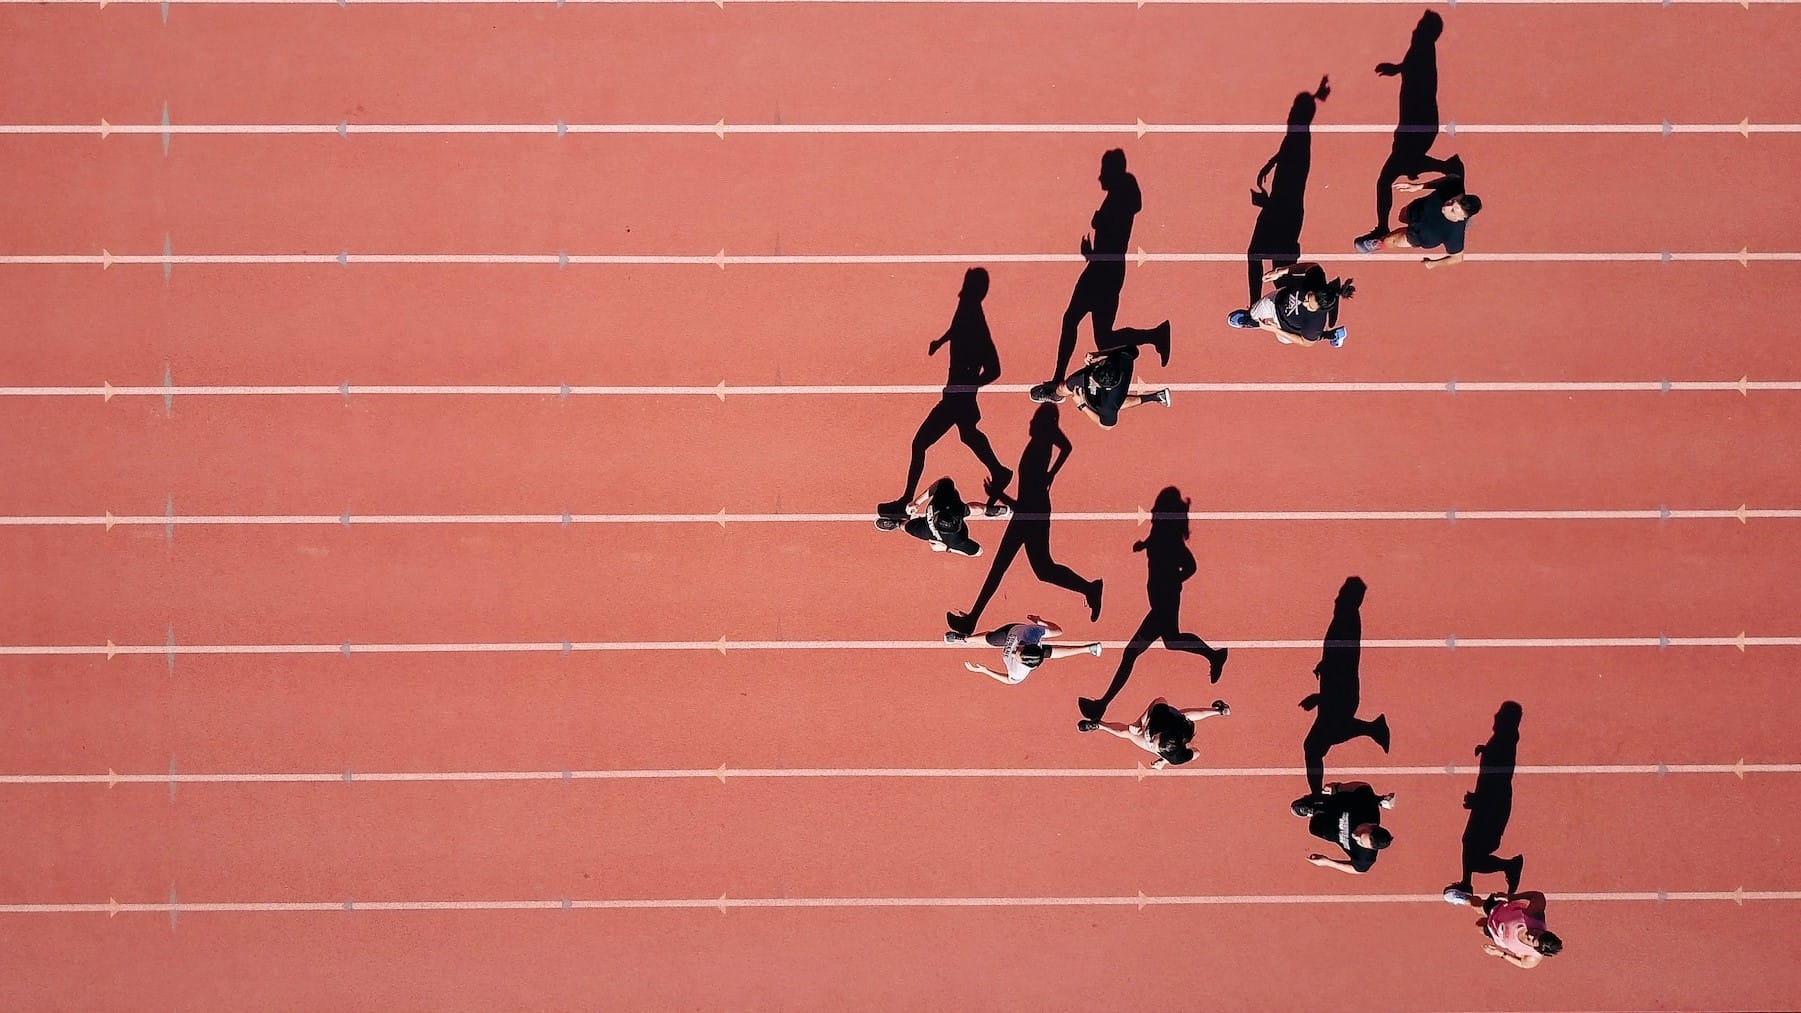 Image: Runners on a track, everyone starting at a different place.